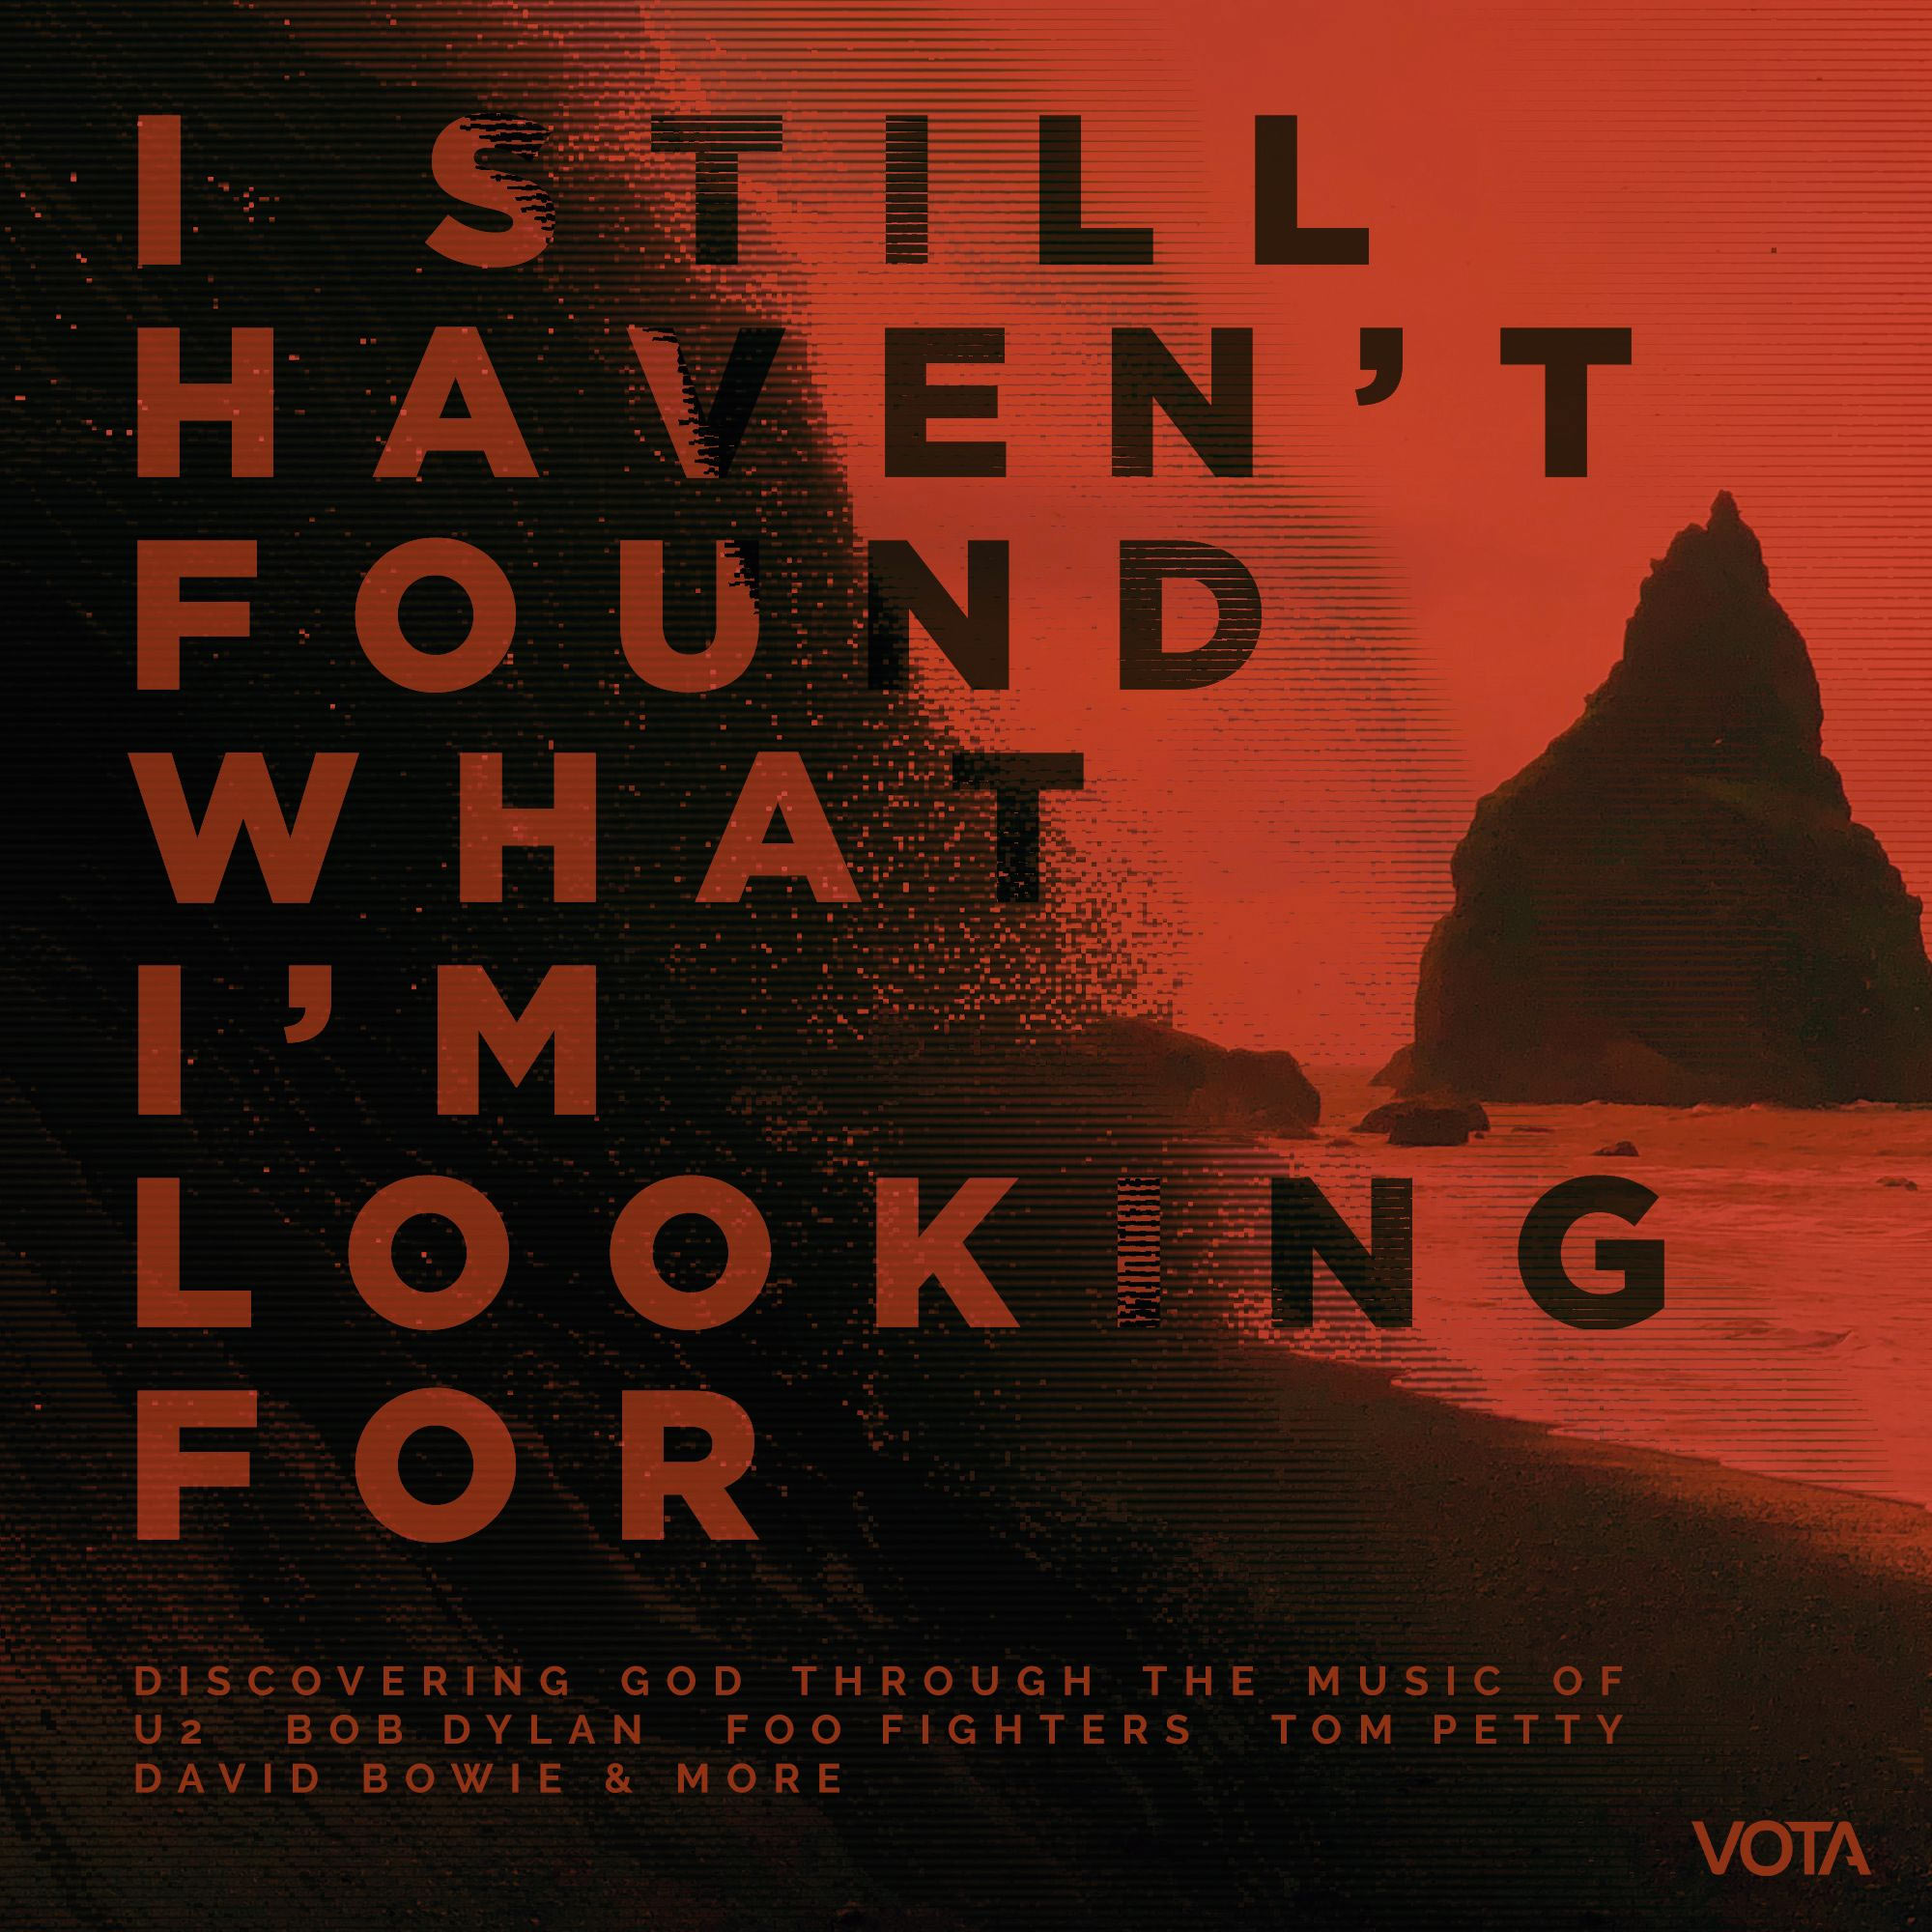 U2's 'I Still Haven't Found What I'm Looking For' — An Anthem Of